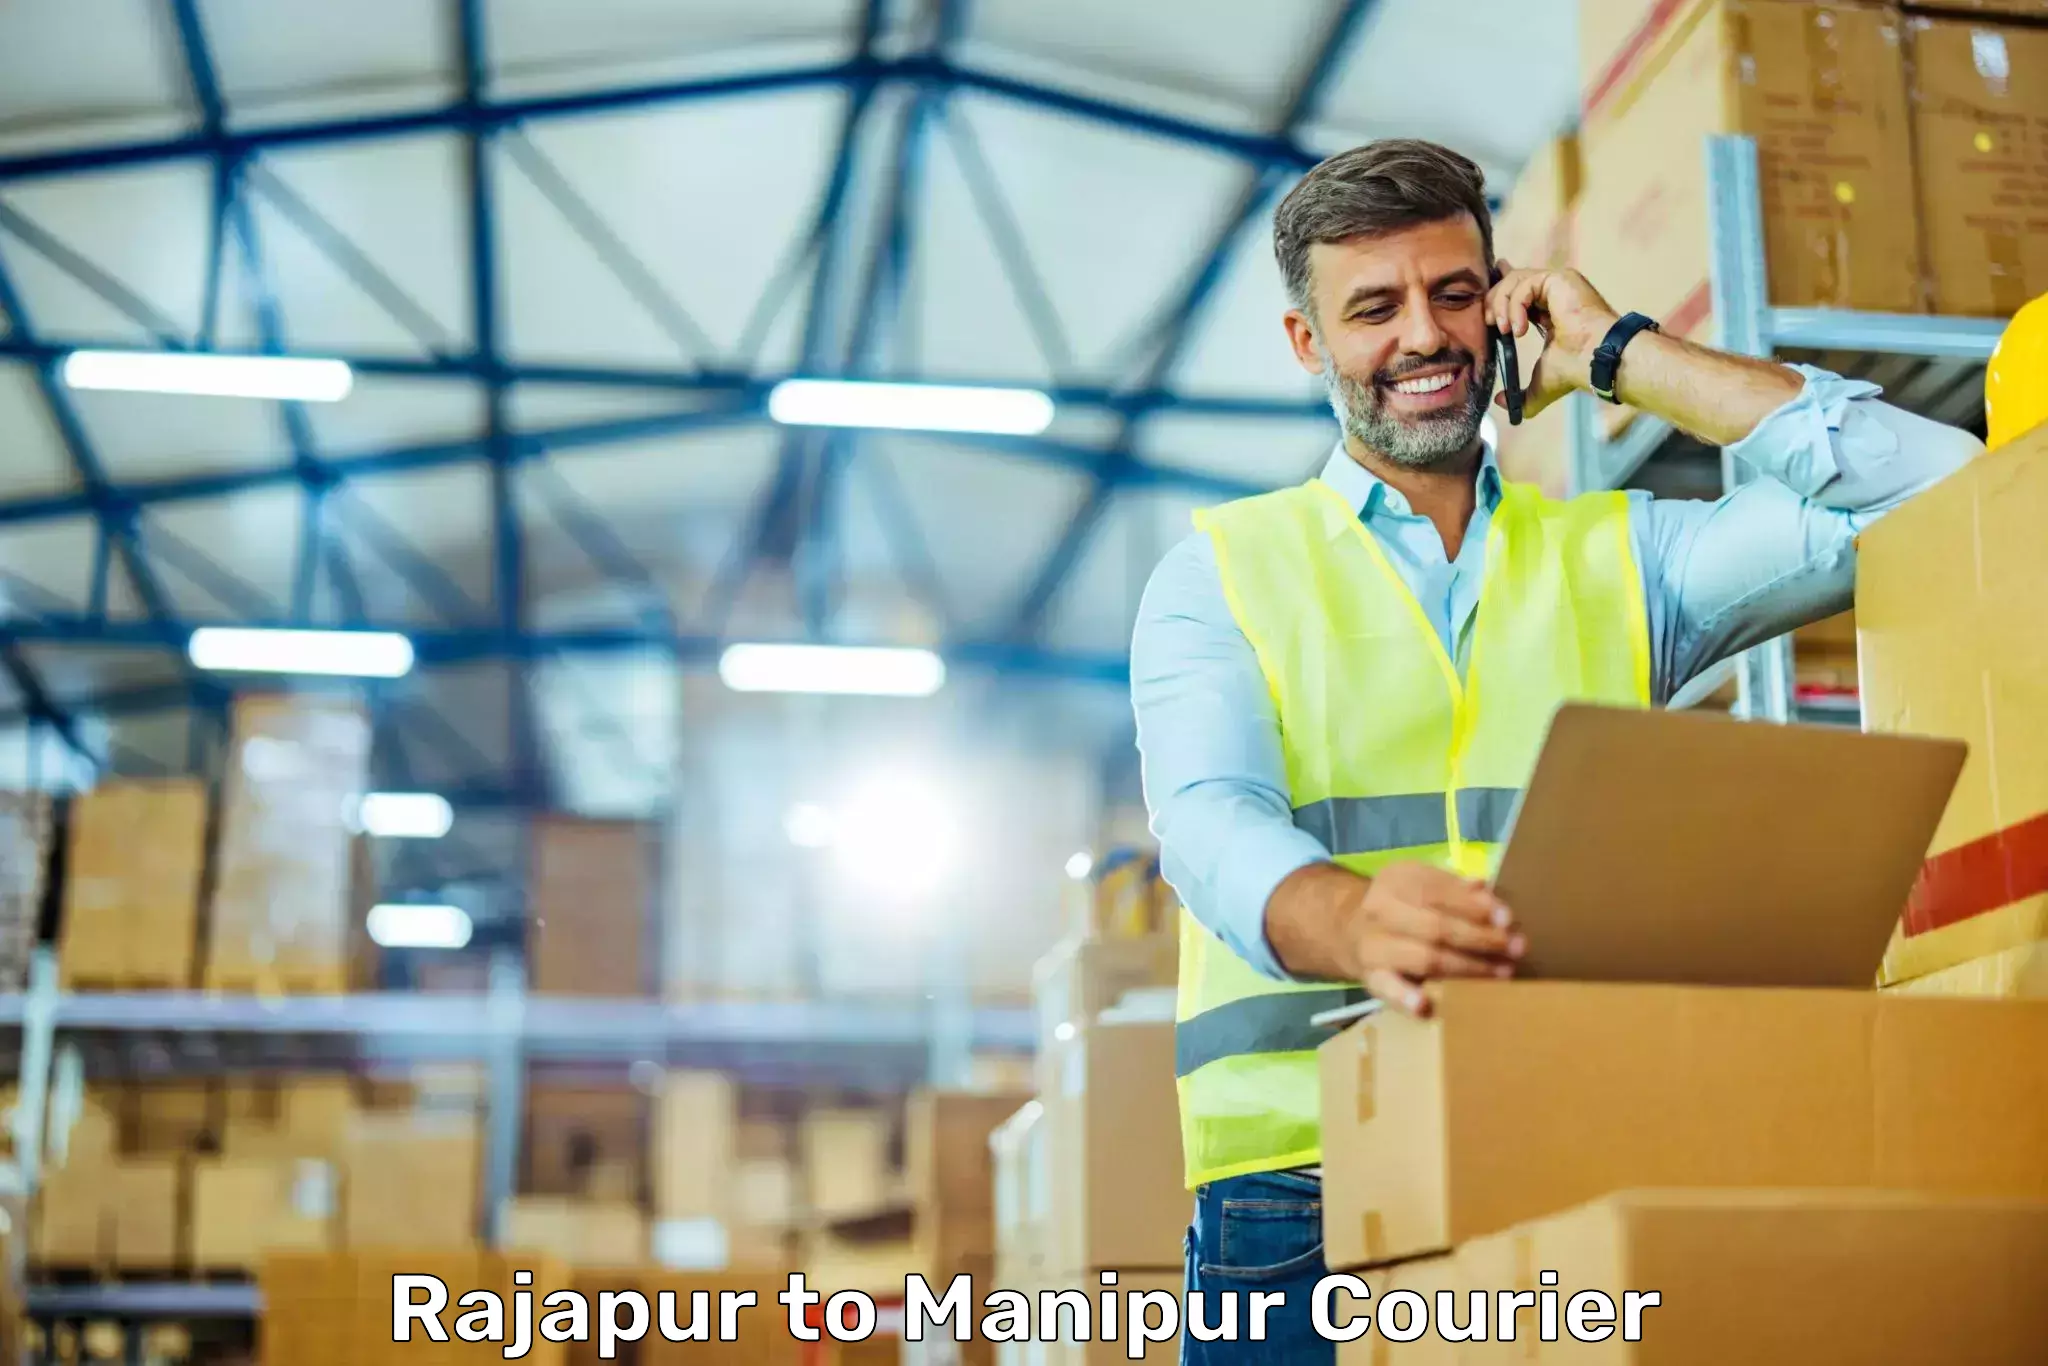 Global shipping networks Rajapur to Manipur